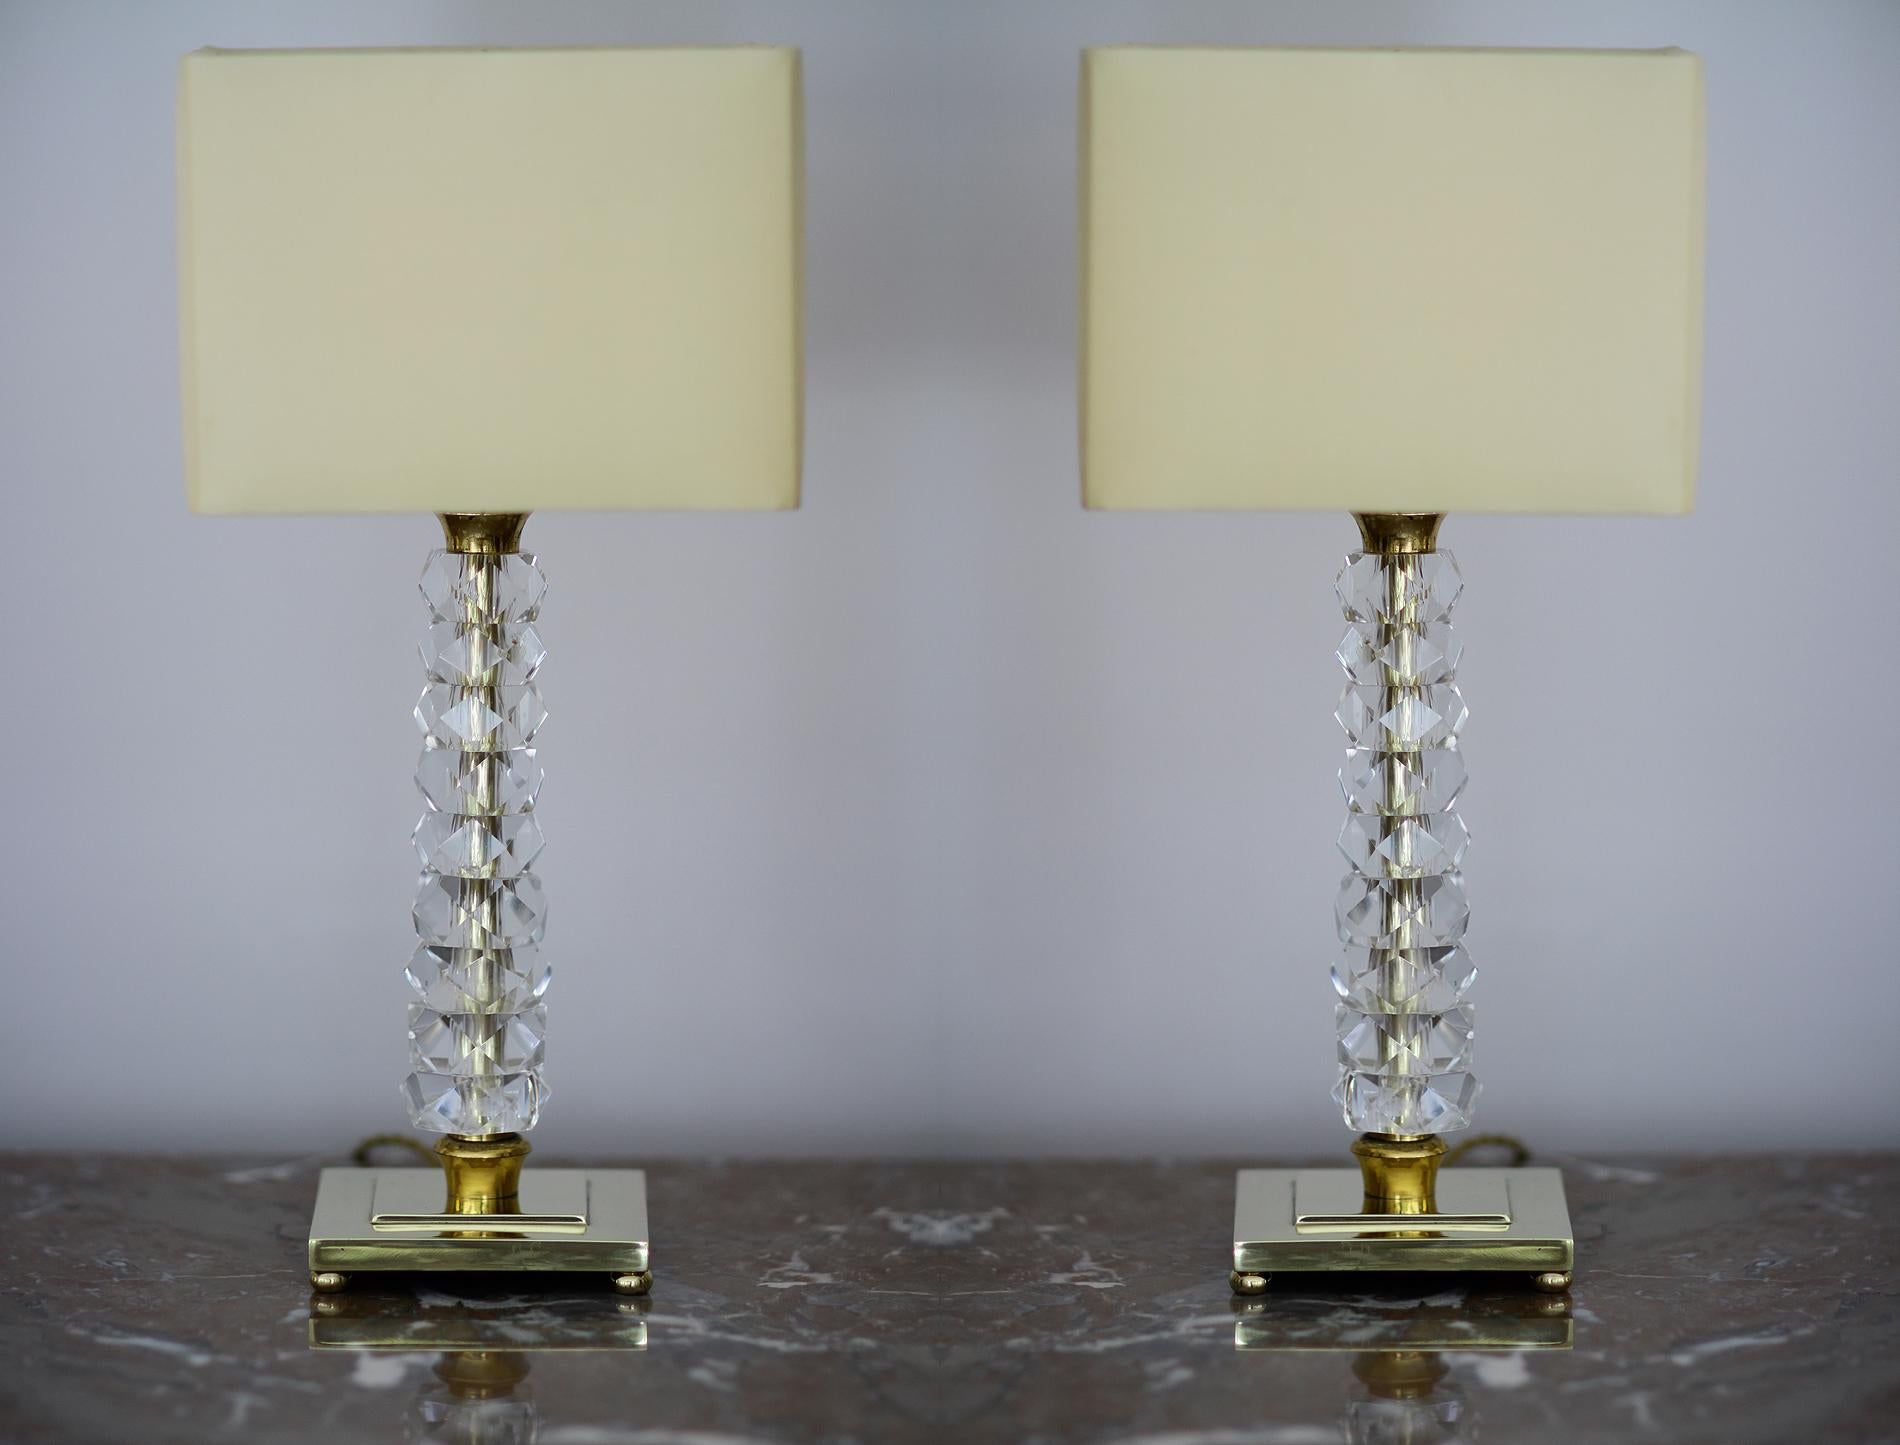 This one is the last pair and probably the most beautiful one...

This pair of comes from a set of 26 lamps (13 pairs) from the Prince de Galles Hotel in Paris, France. The lamp bodies are in gilt bronze and the stems are beaded in crystal. These